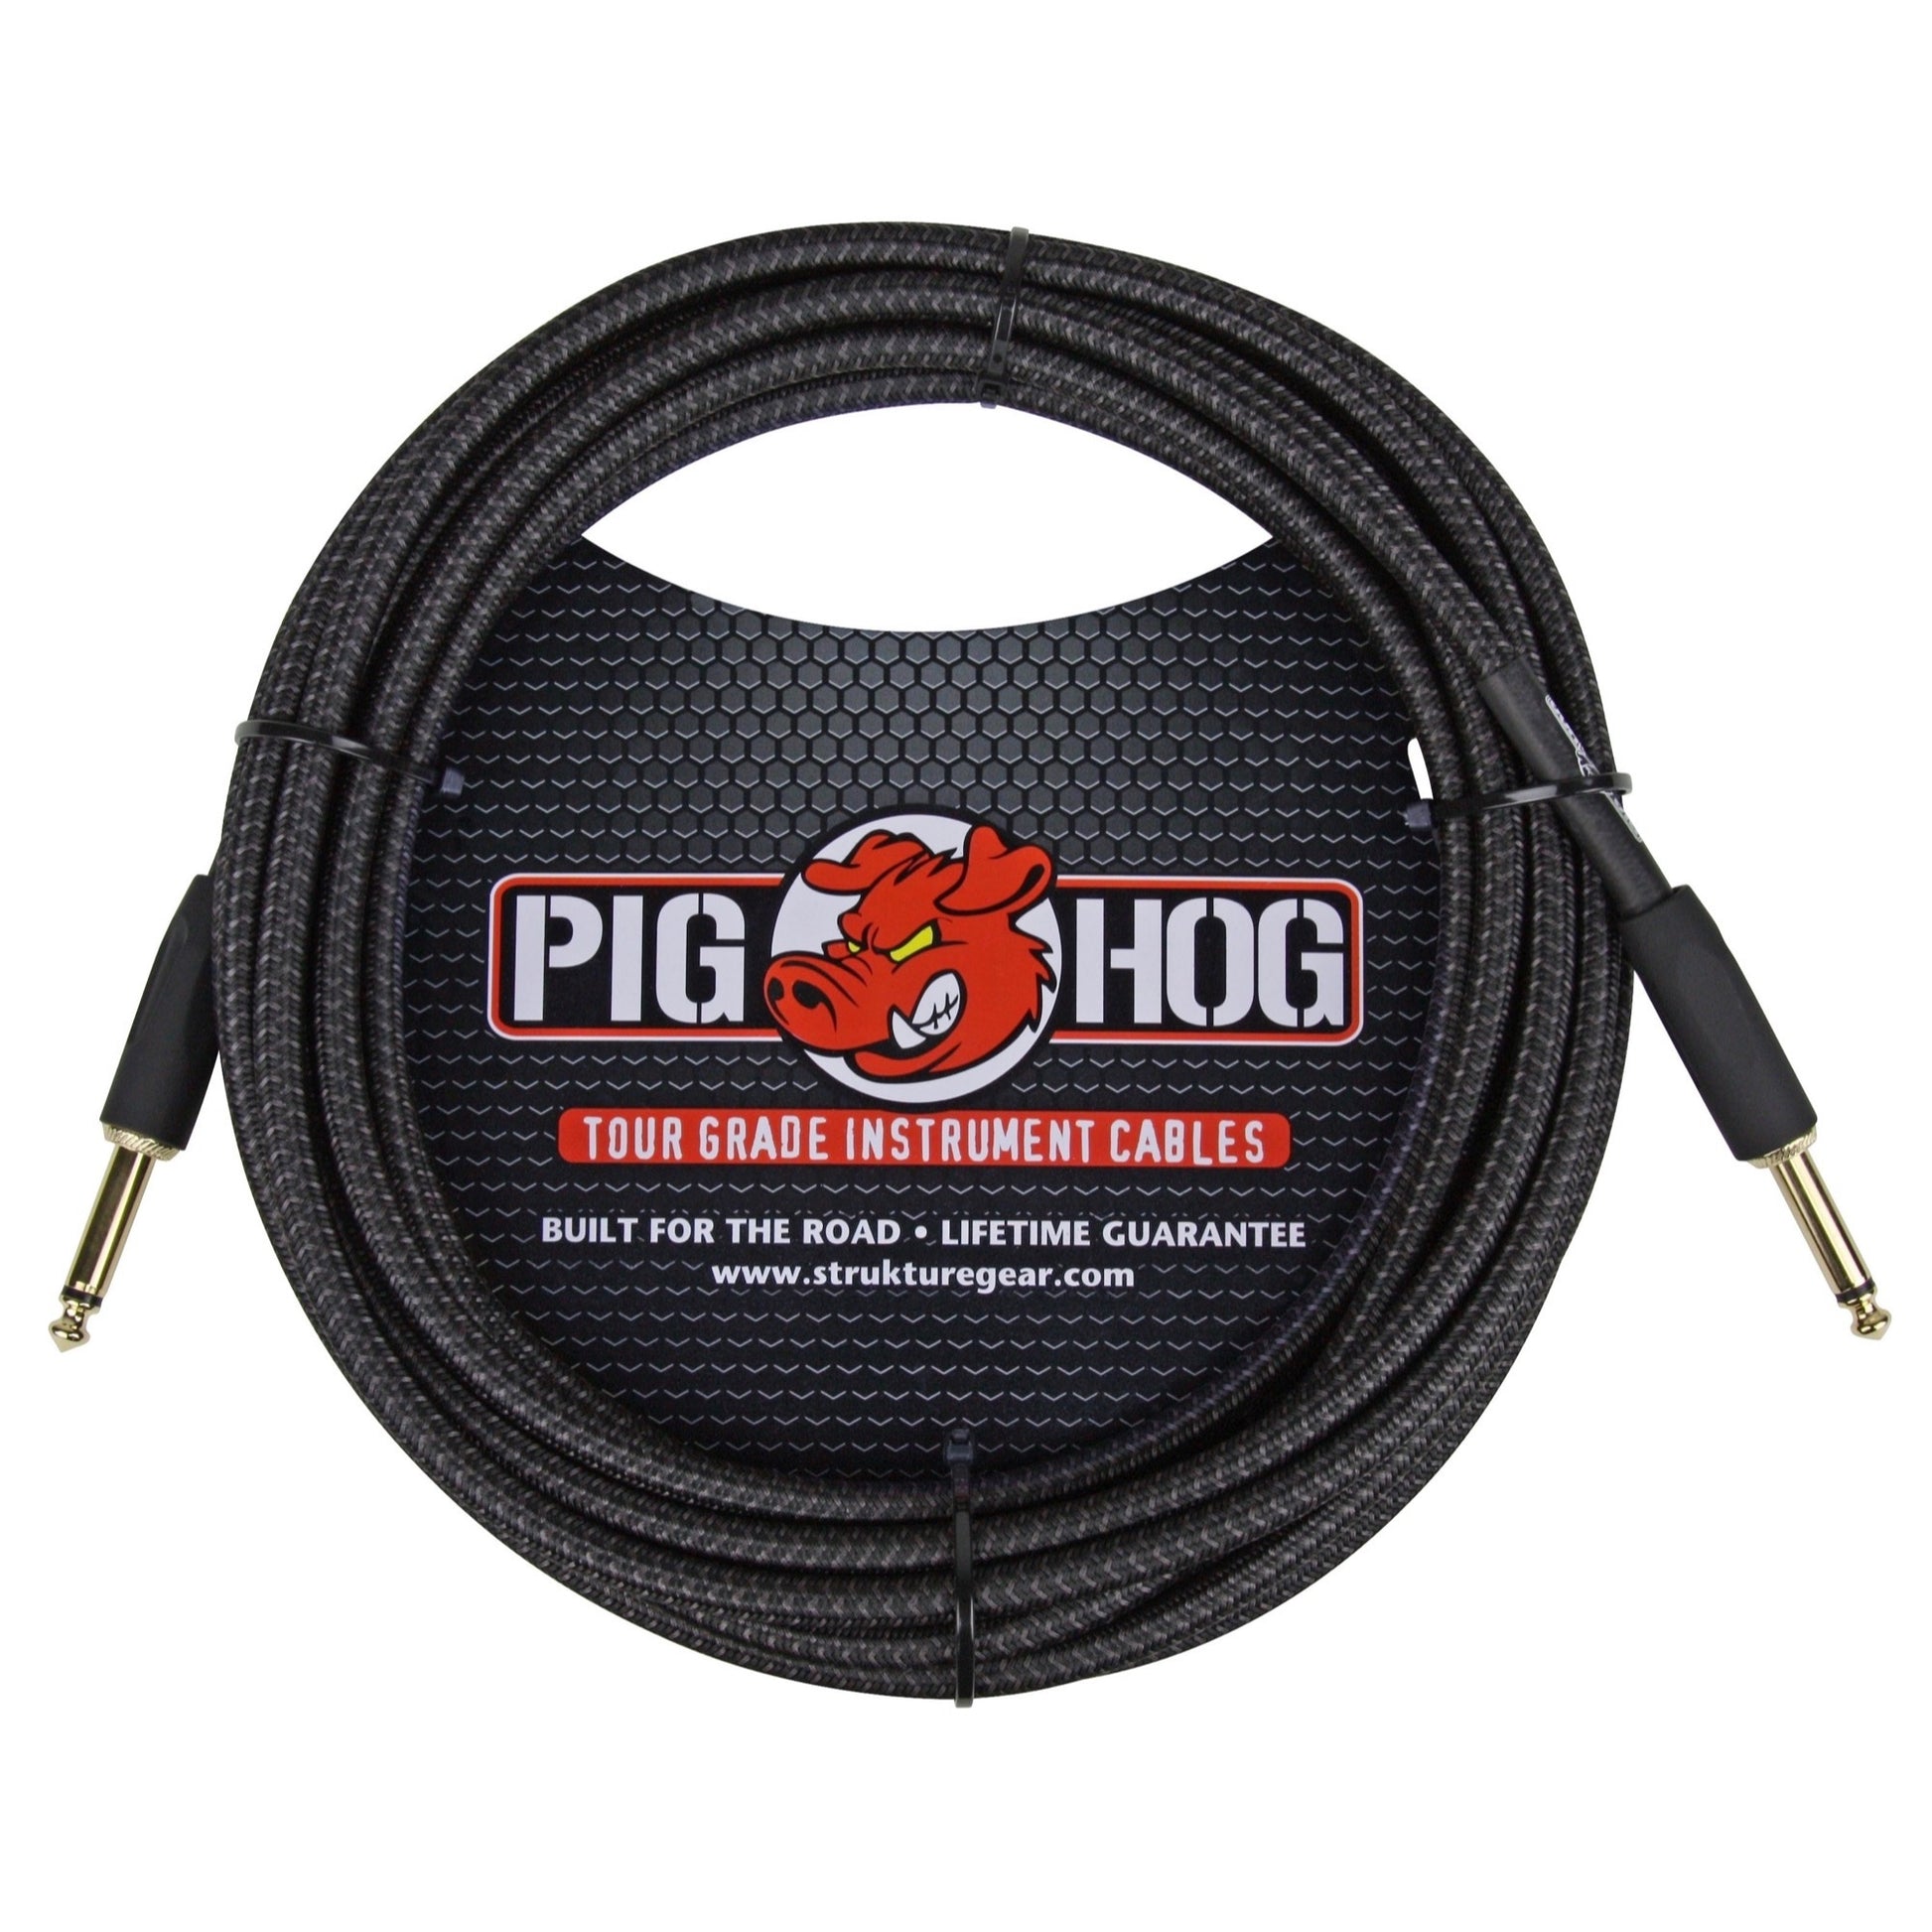 Pig Hog Vintage Series Instrument Cable, 1/4 Inch Straight to 1/4 Inch Straight, Black, 20'